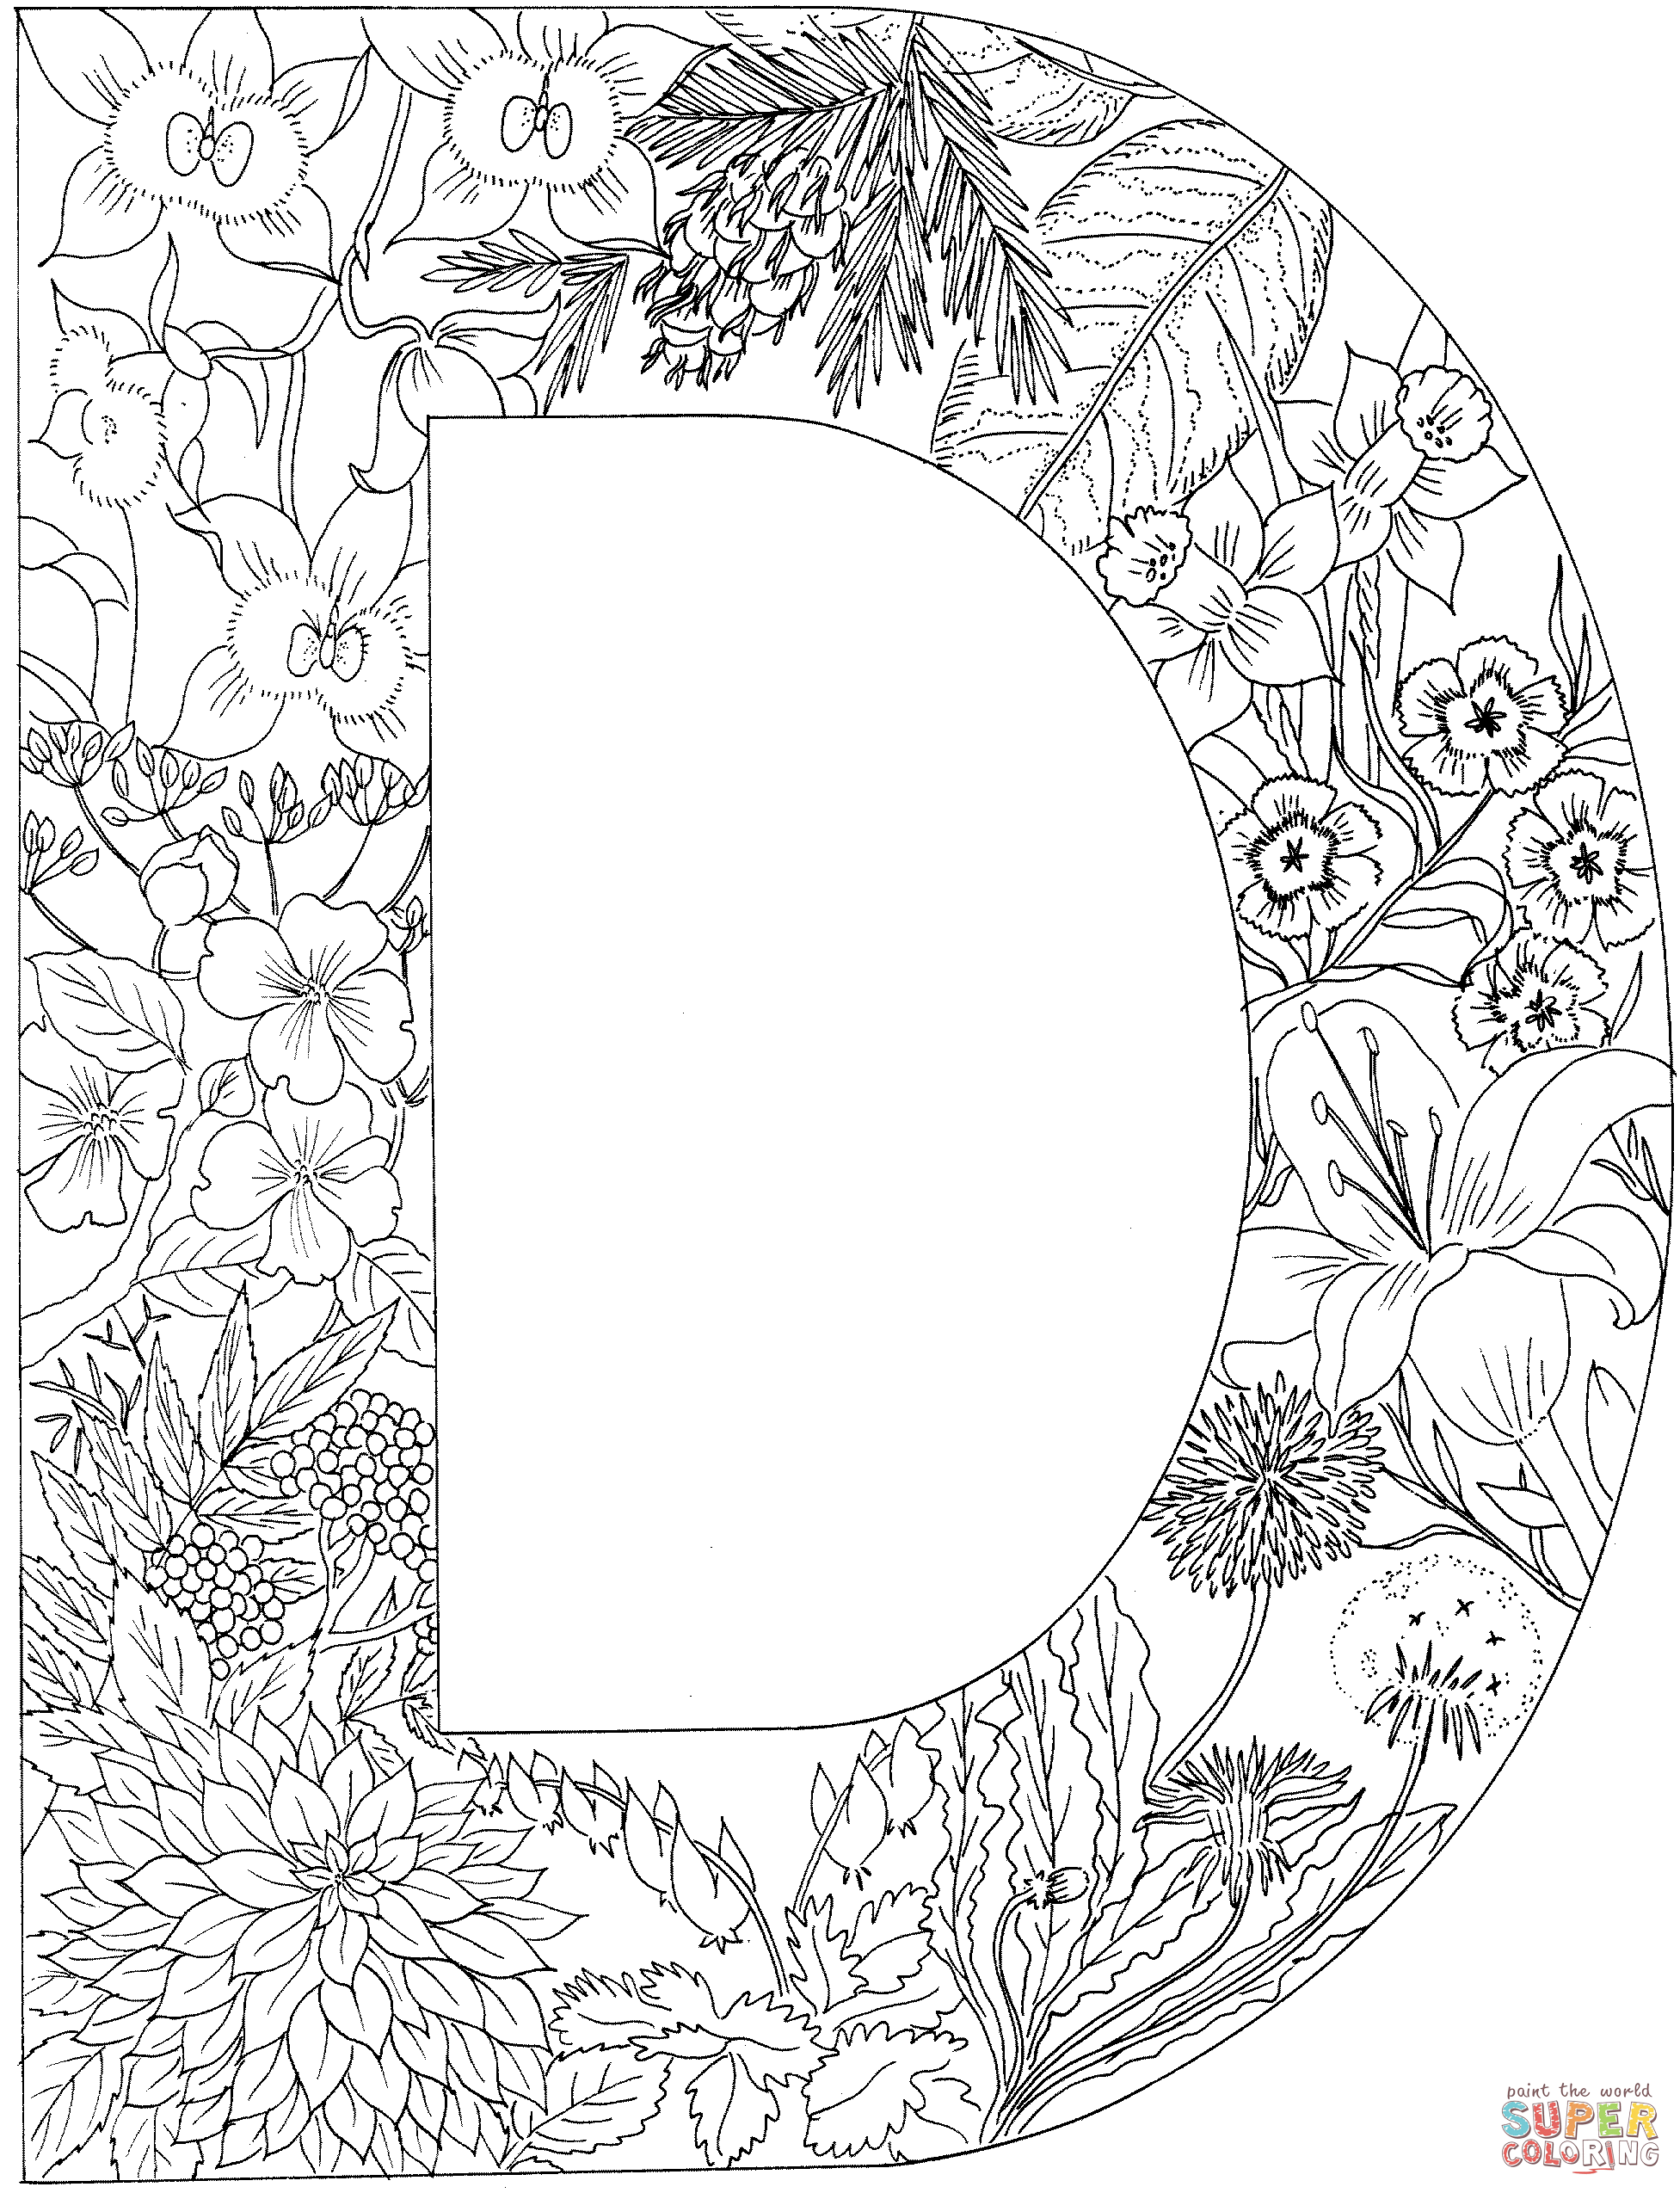 coloring-page-letters-google-search-abc-coloring-pages-coloring-corgi-coloring-pages-download